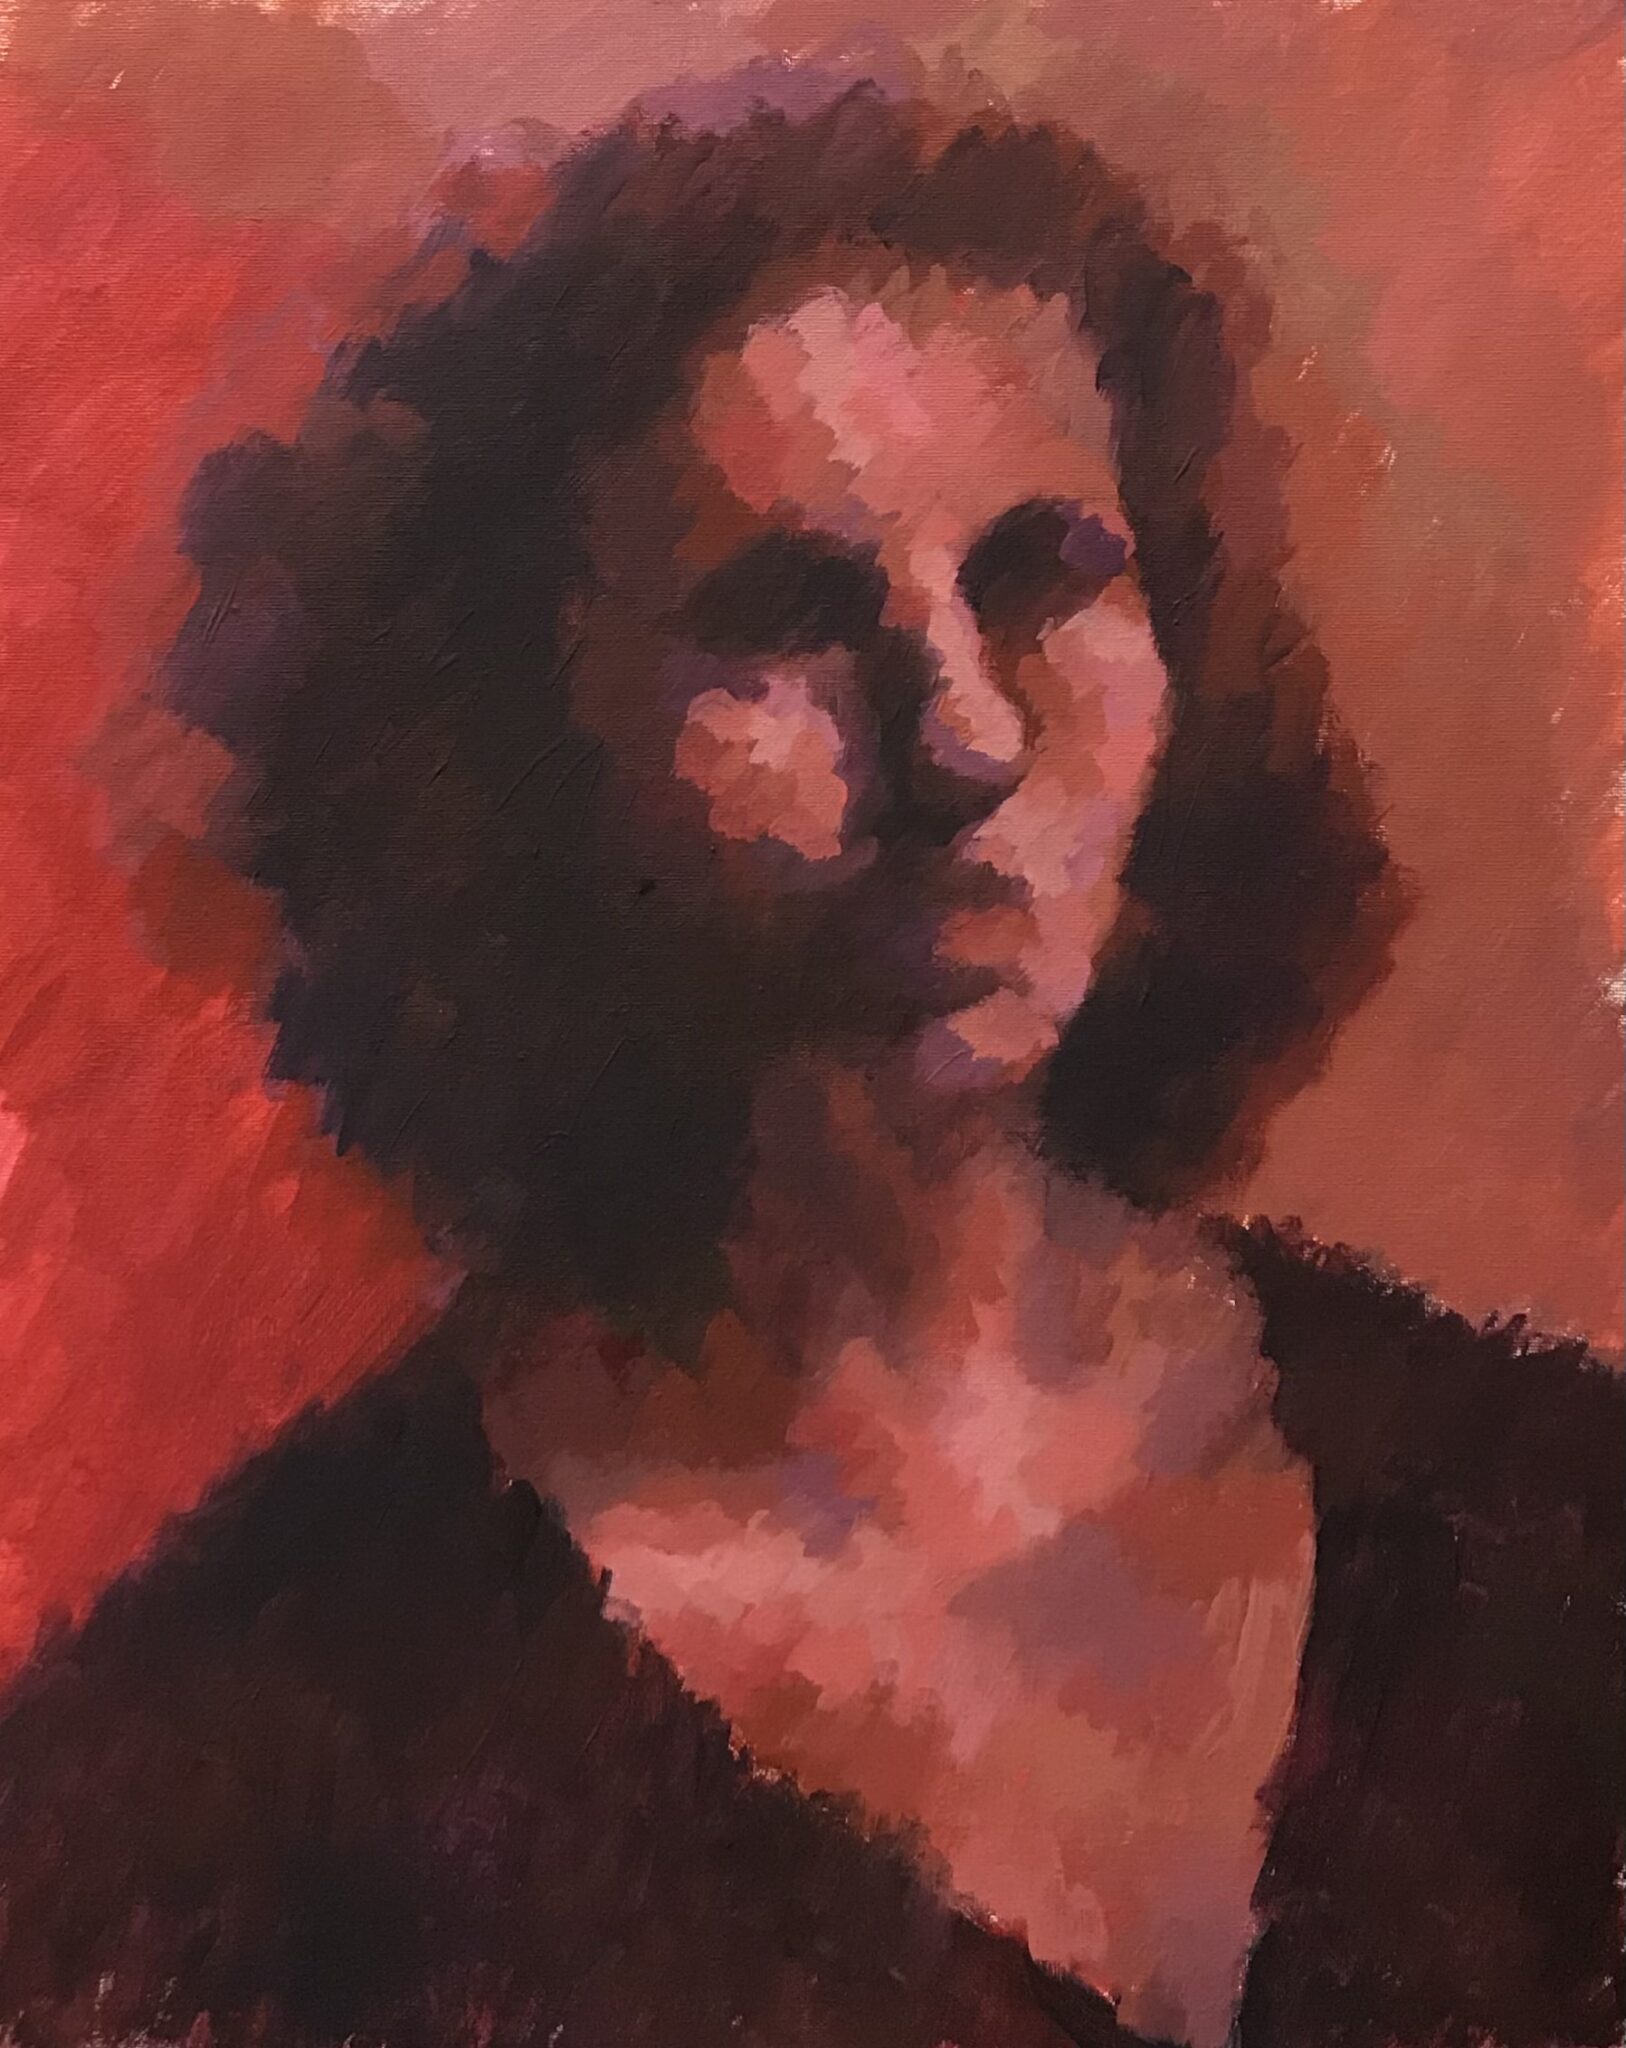 three quarter view portrait of woman using primarily red tones, wearing a v-neck shirt, painted on a pre-prepared canvas board in oil paint